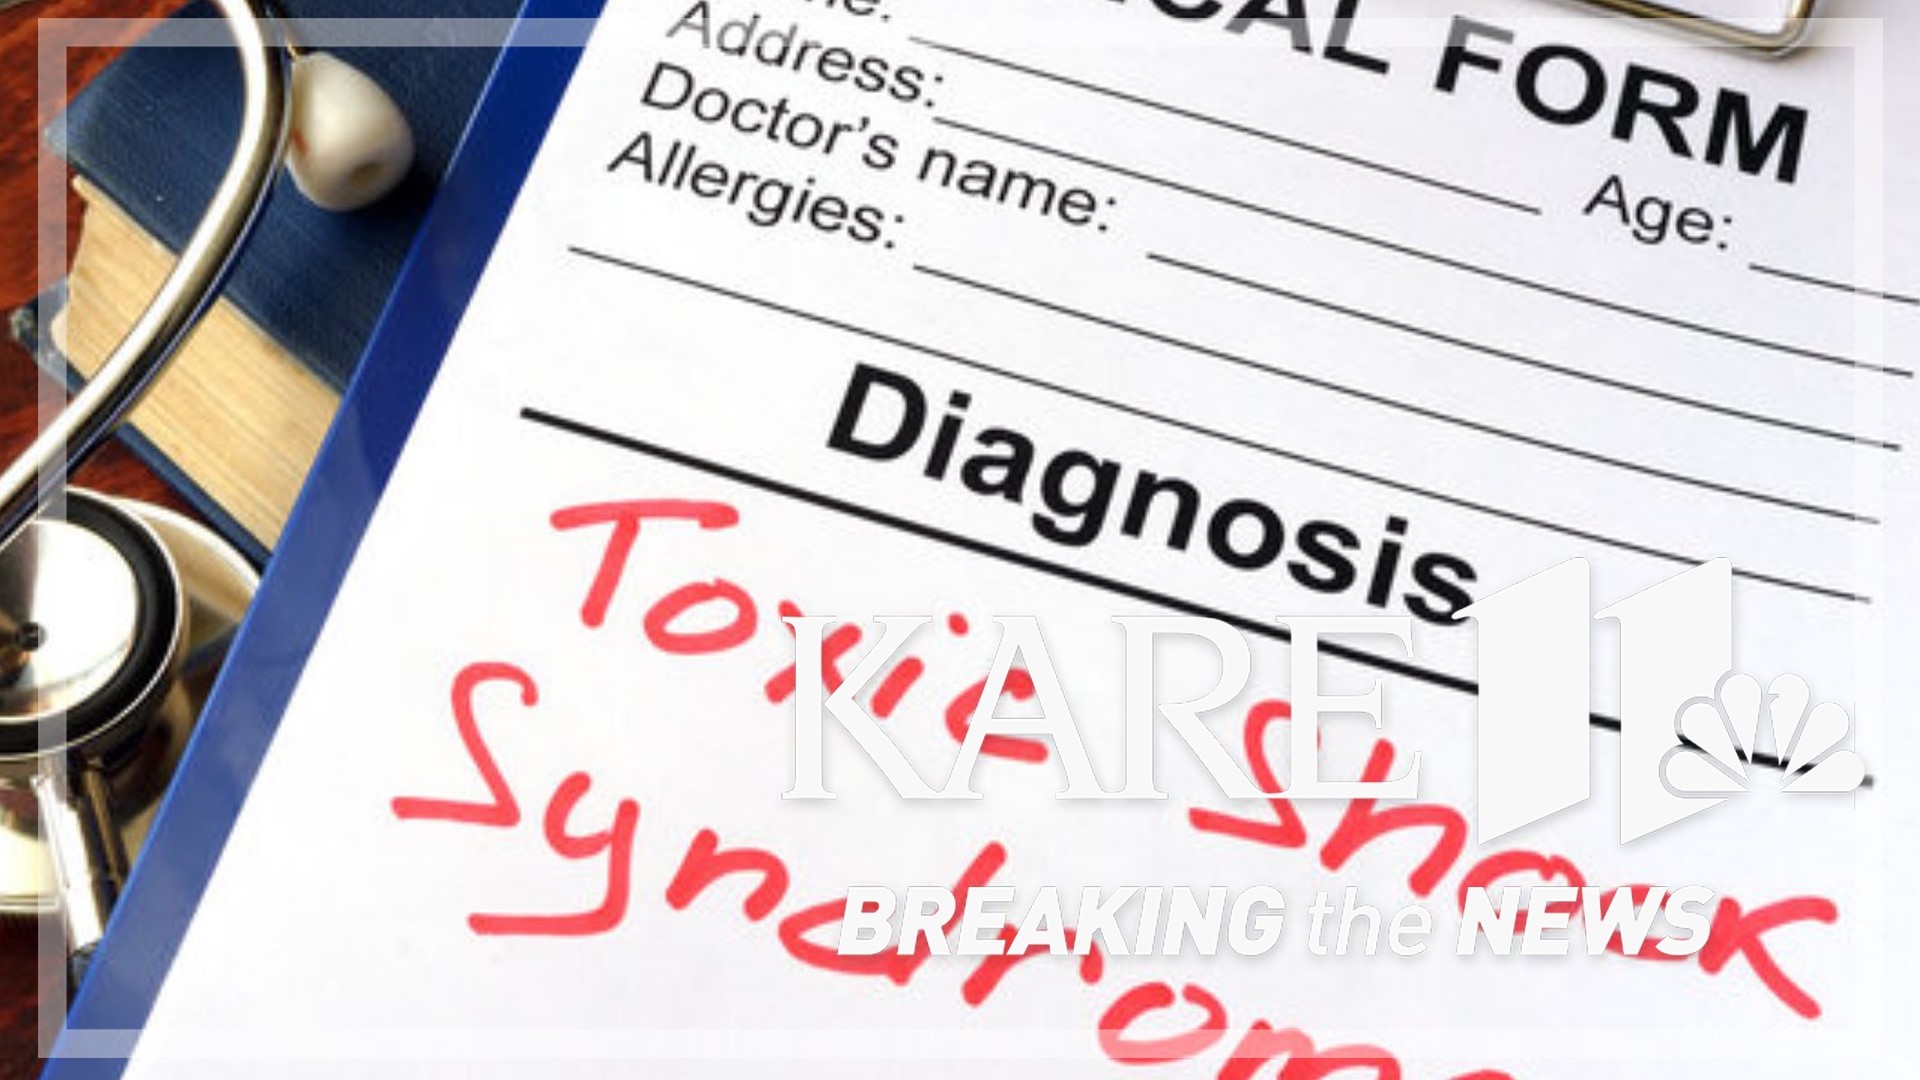 The Wisconsin Department of Health Services says toxic shock syndrome is a serious illness caused by bacteria that can produce toxins.